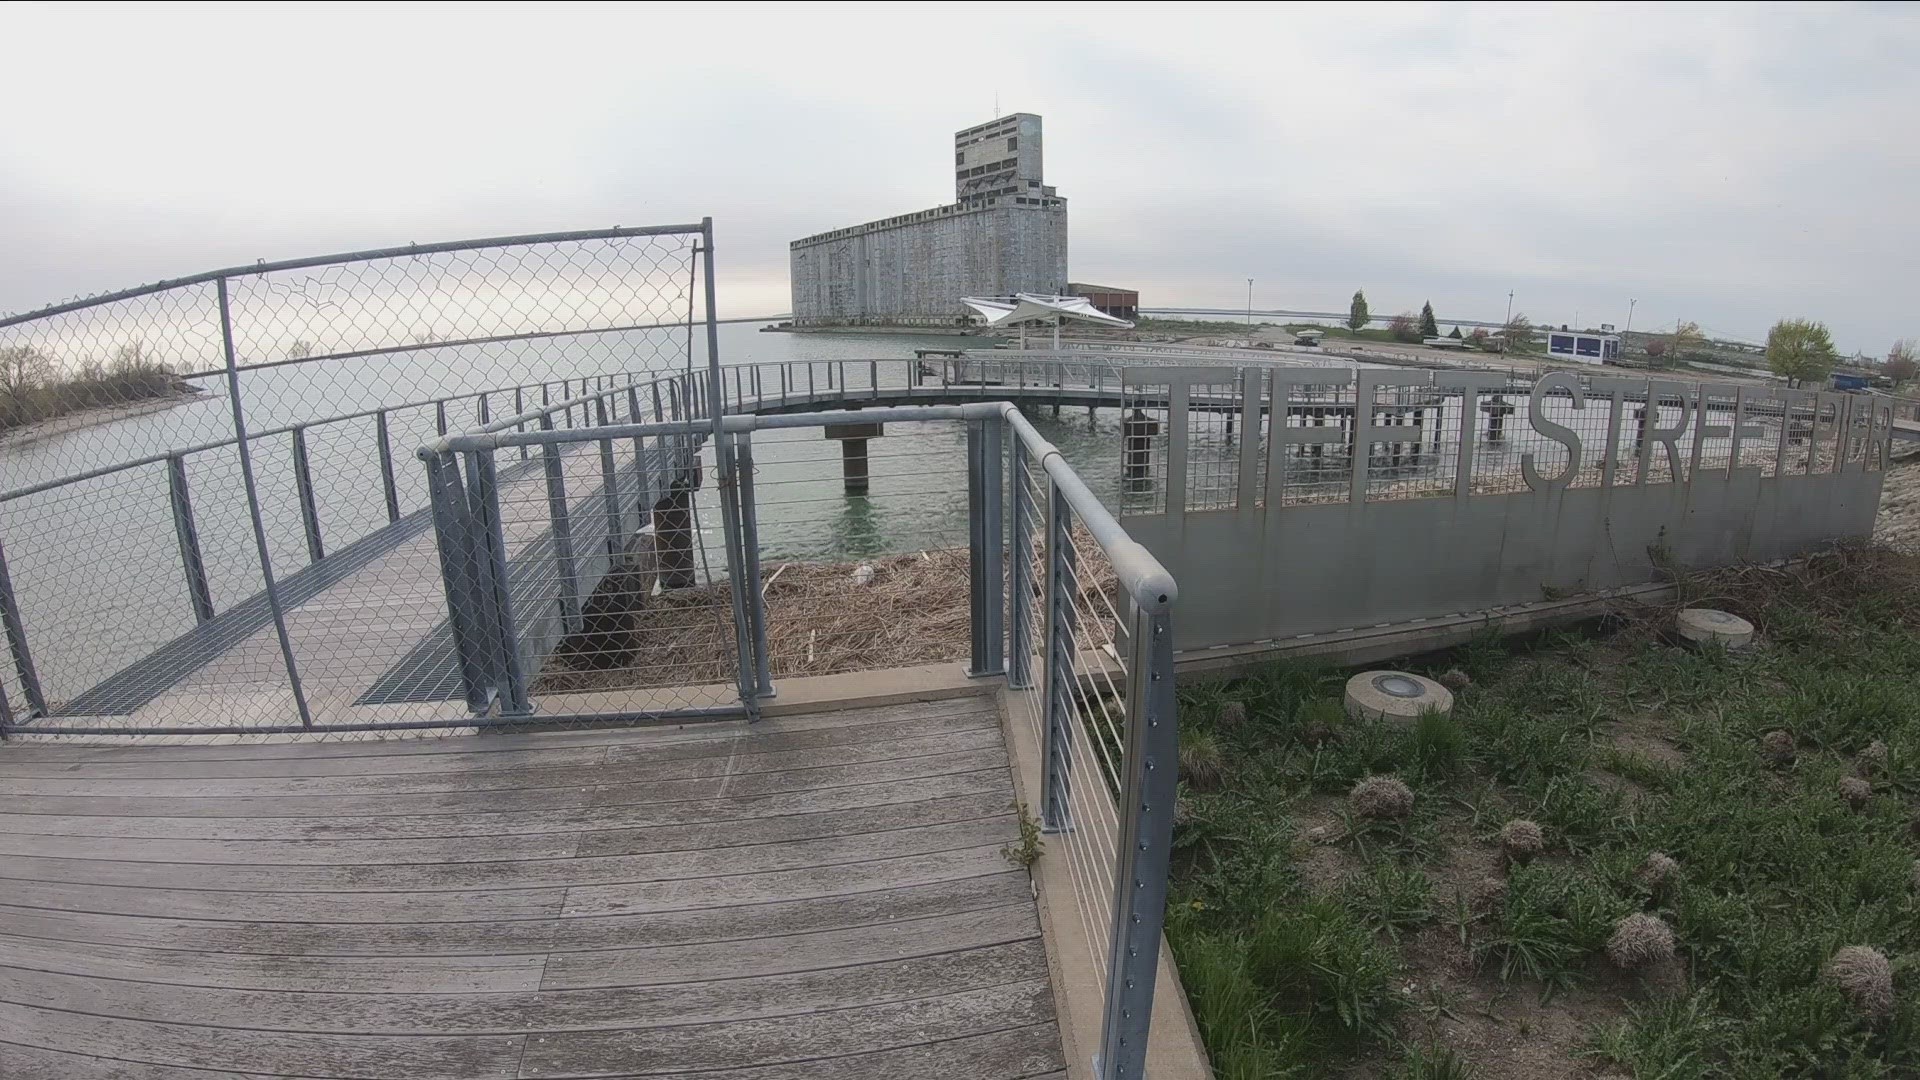 The Tifft Street Pier is now open to the public following repairs to damage that closed it in 2016.